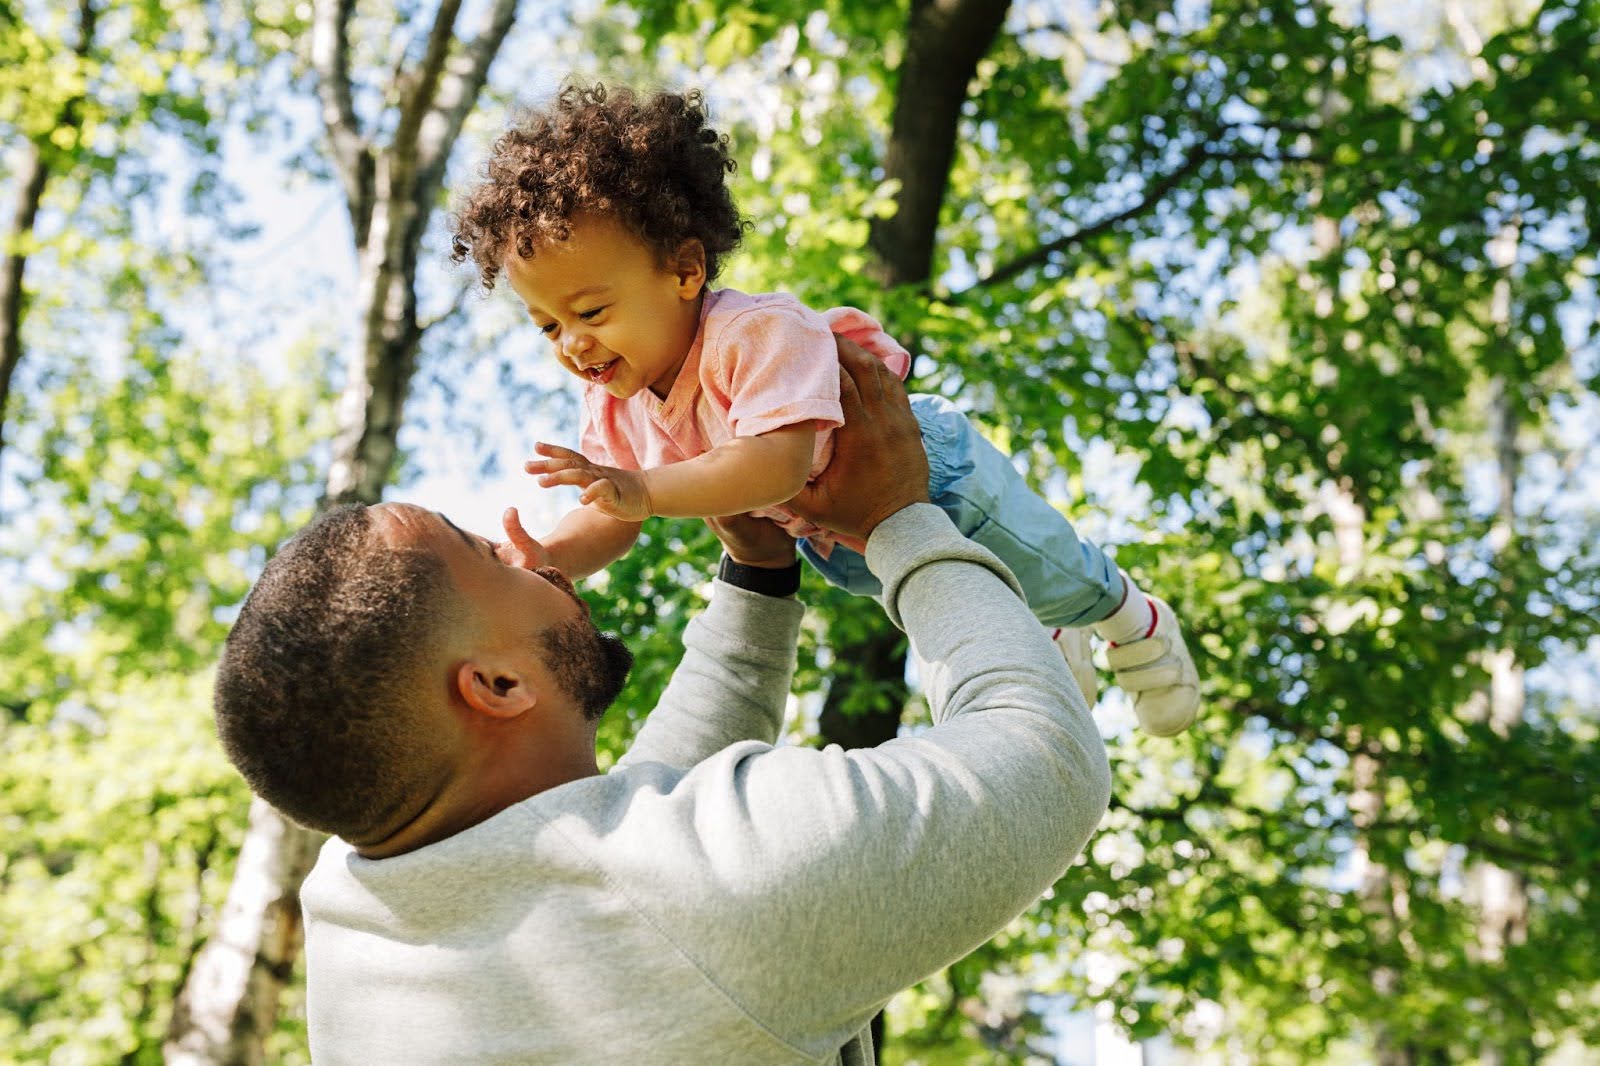 Father lifting his toddler up in the air in a forest